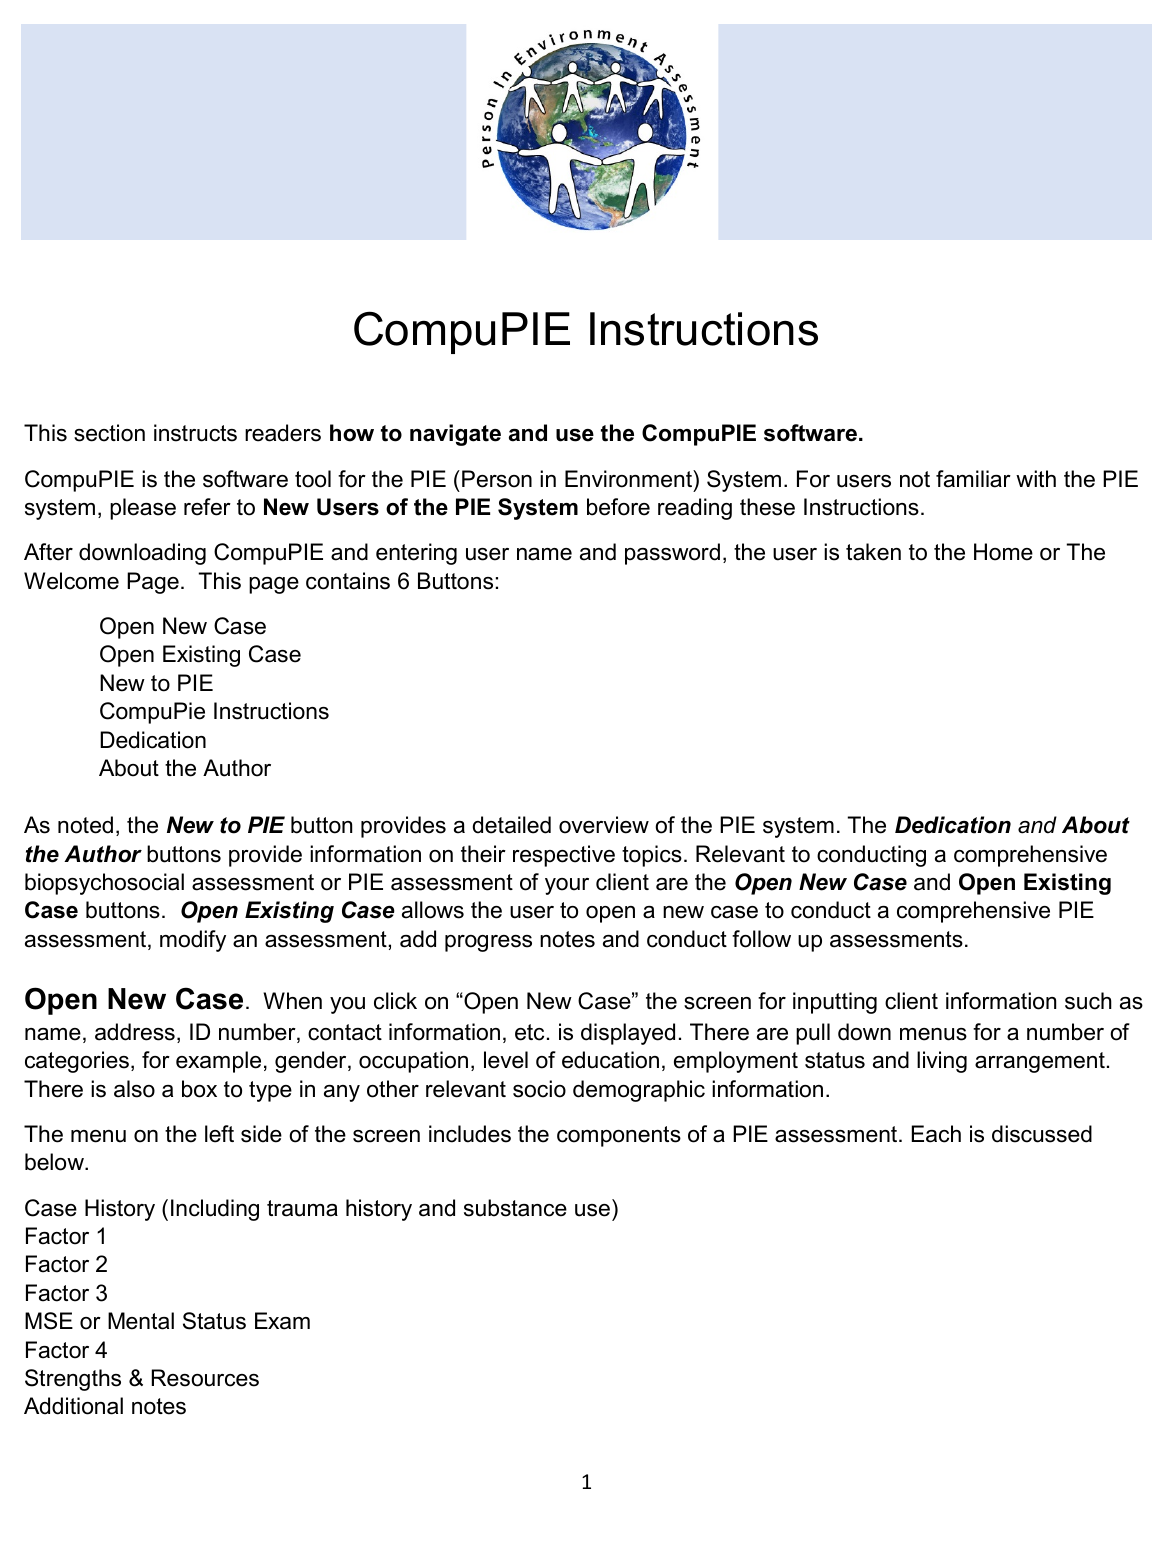 Page 1 of 5 - Instructions For CompuPIE _1_